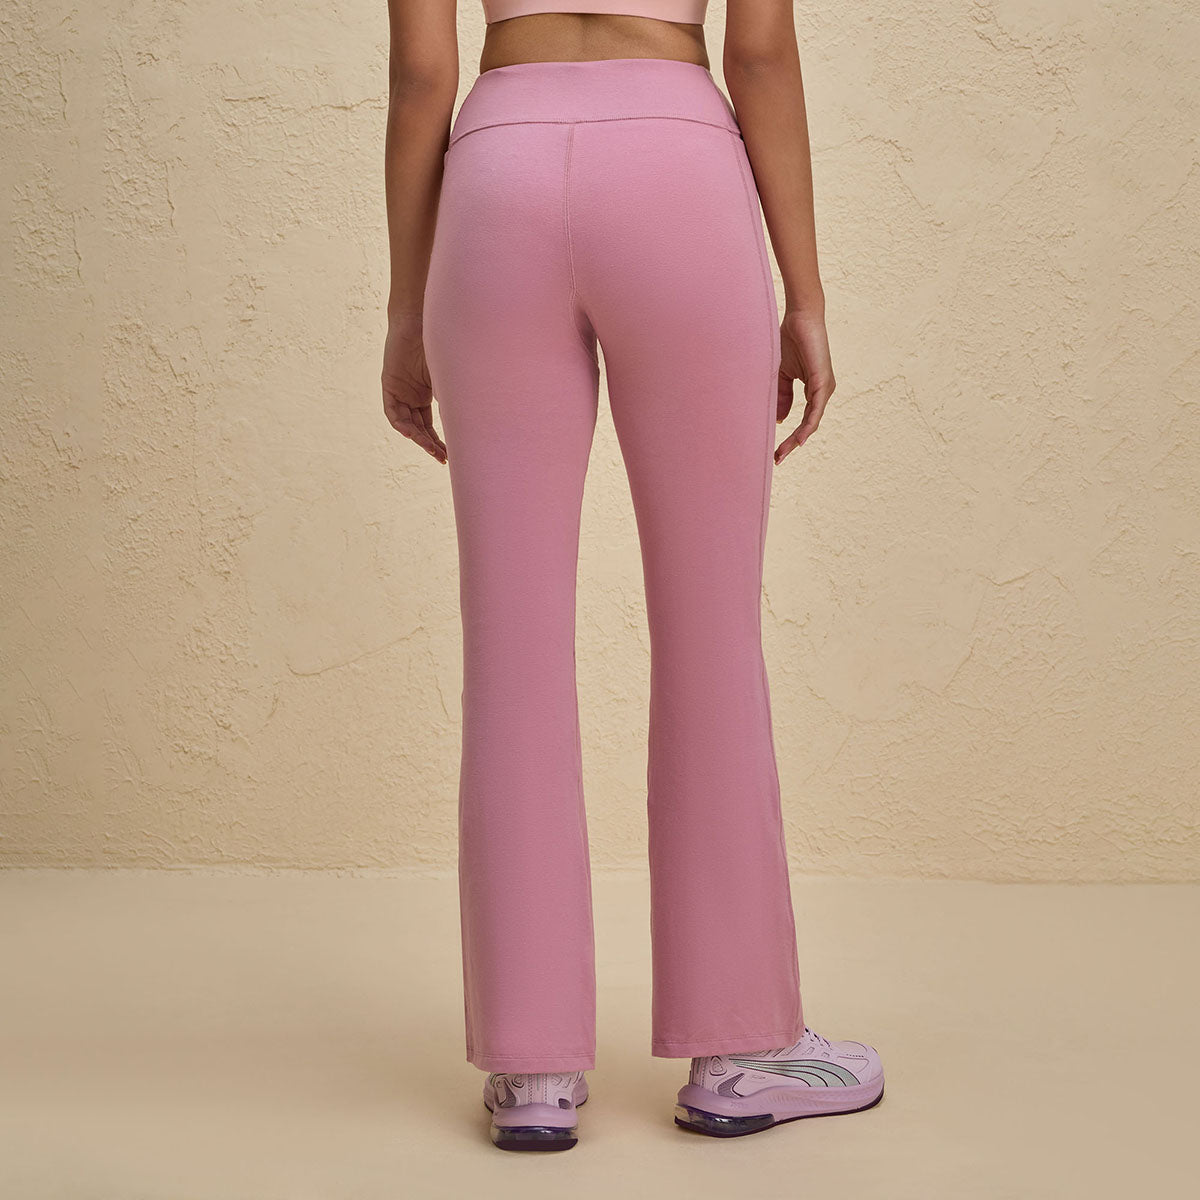 Nykd By Nykaa Iconic Super Comfy Cotton Flare Leggings with Pockets-NYAT503-Mauve